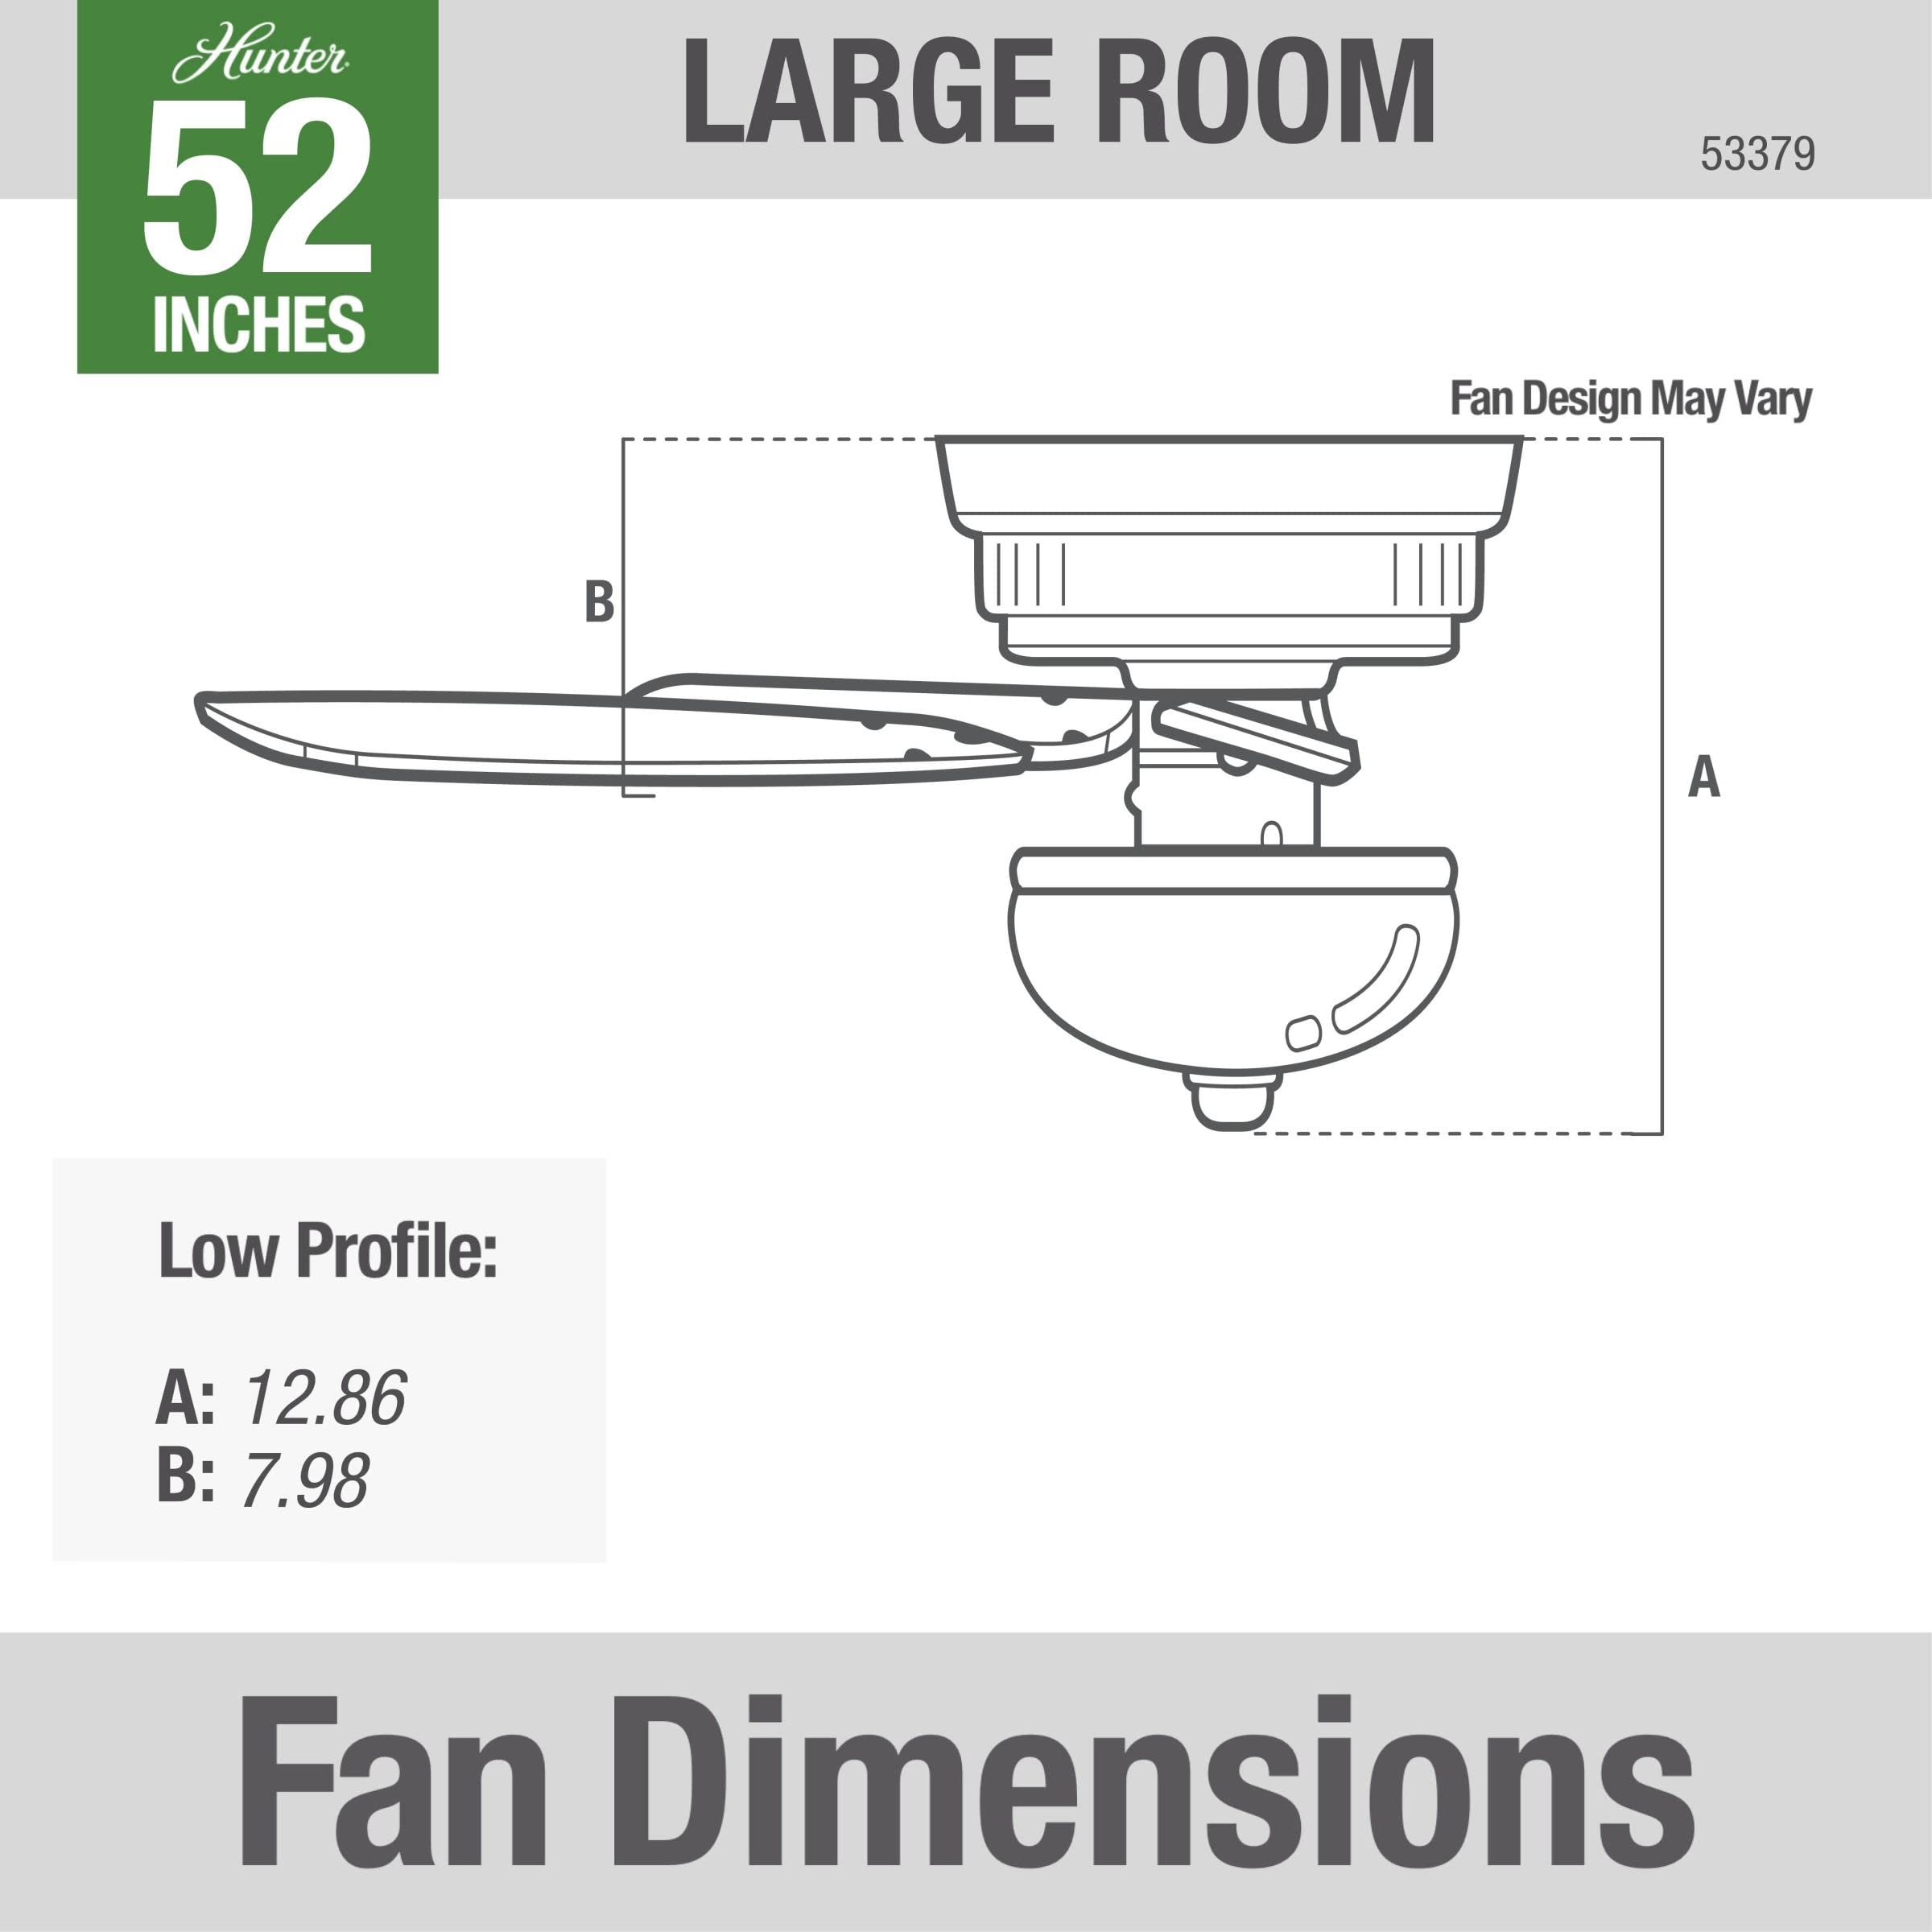 Hunter Fan Company 53379 Hunter Kenbridge Indoor Low Profile Ceiling Fan with LED Light and Pull Chain Control, Large, Noble Bronze Finish